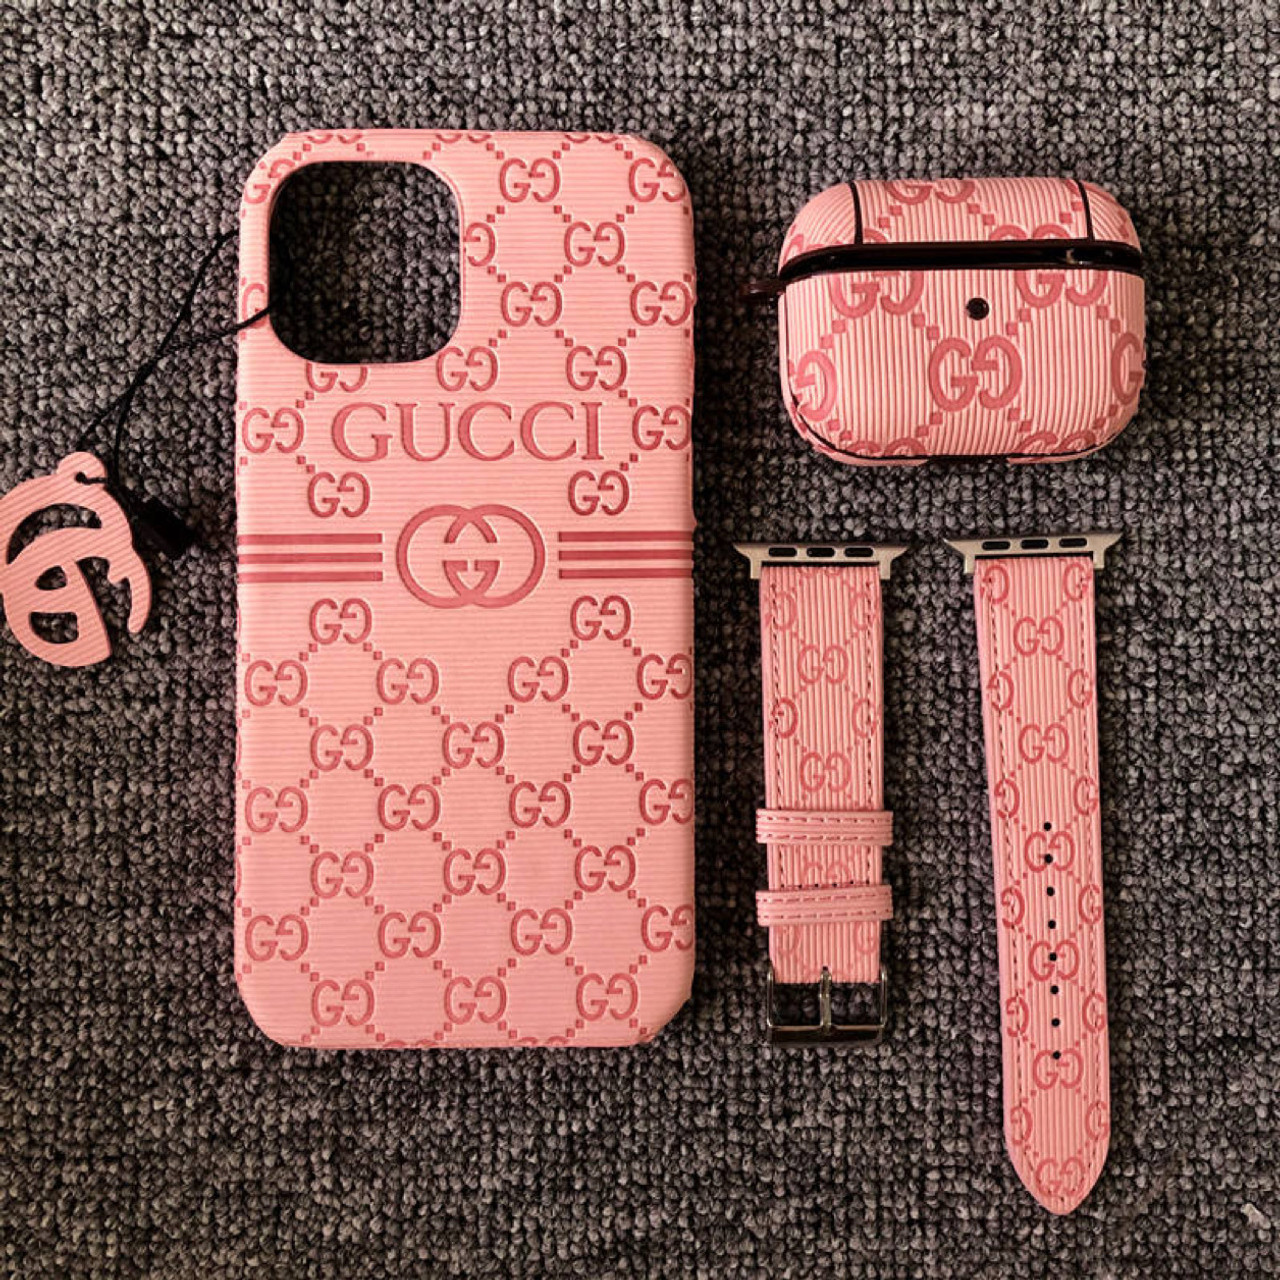 Gucci Cardinal Pink iPhone 7 Case – javacases